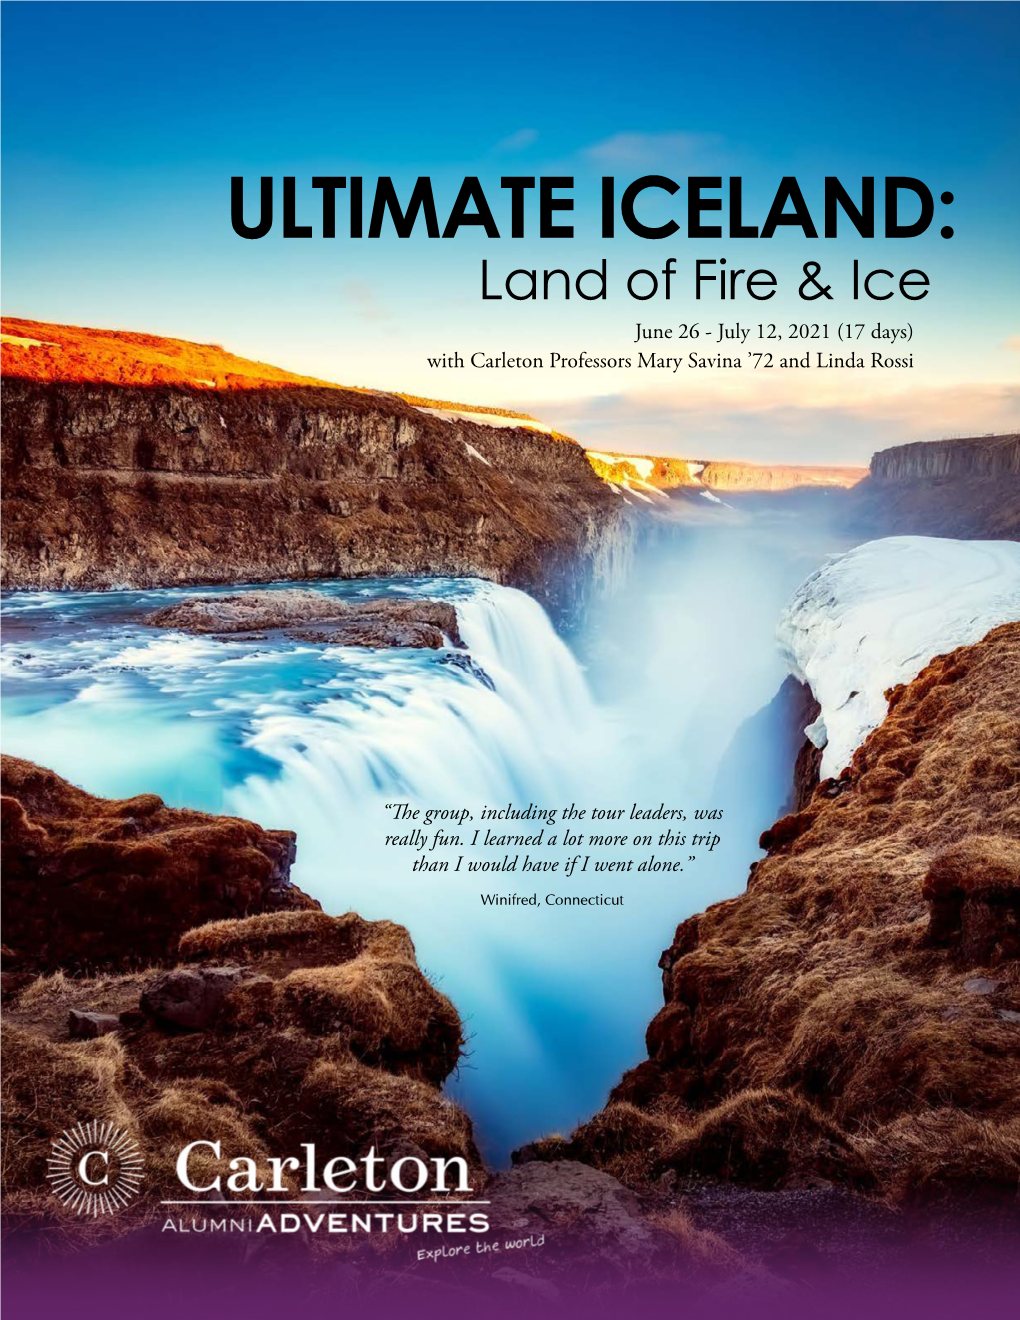 ULTIMATE ICELAND: Land of Fire & Ice June 26 - July 12, 2021 (17 Days) with Carleton Professors Mary Savina ’72 and Linda Rossi